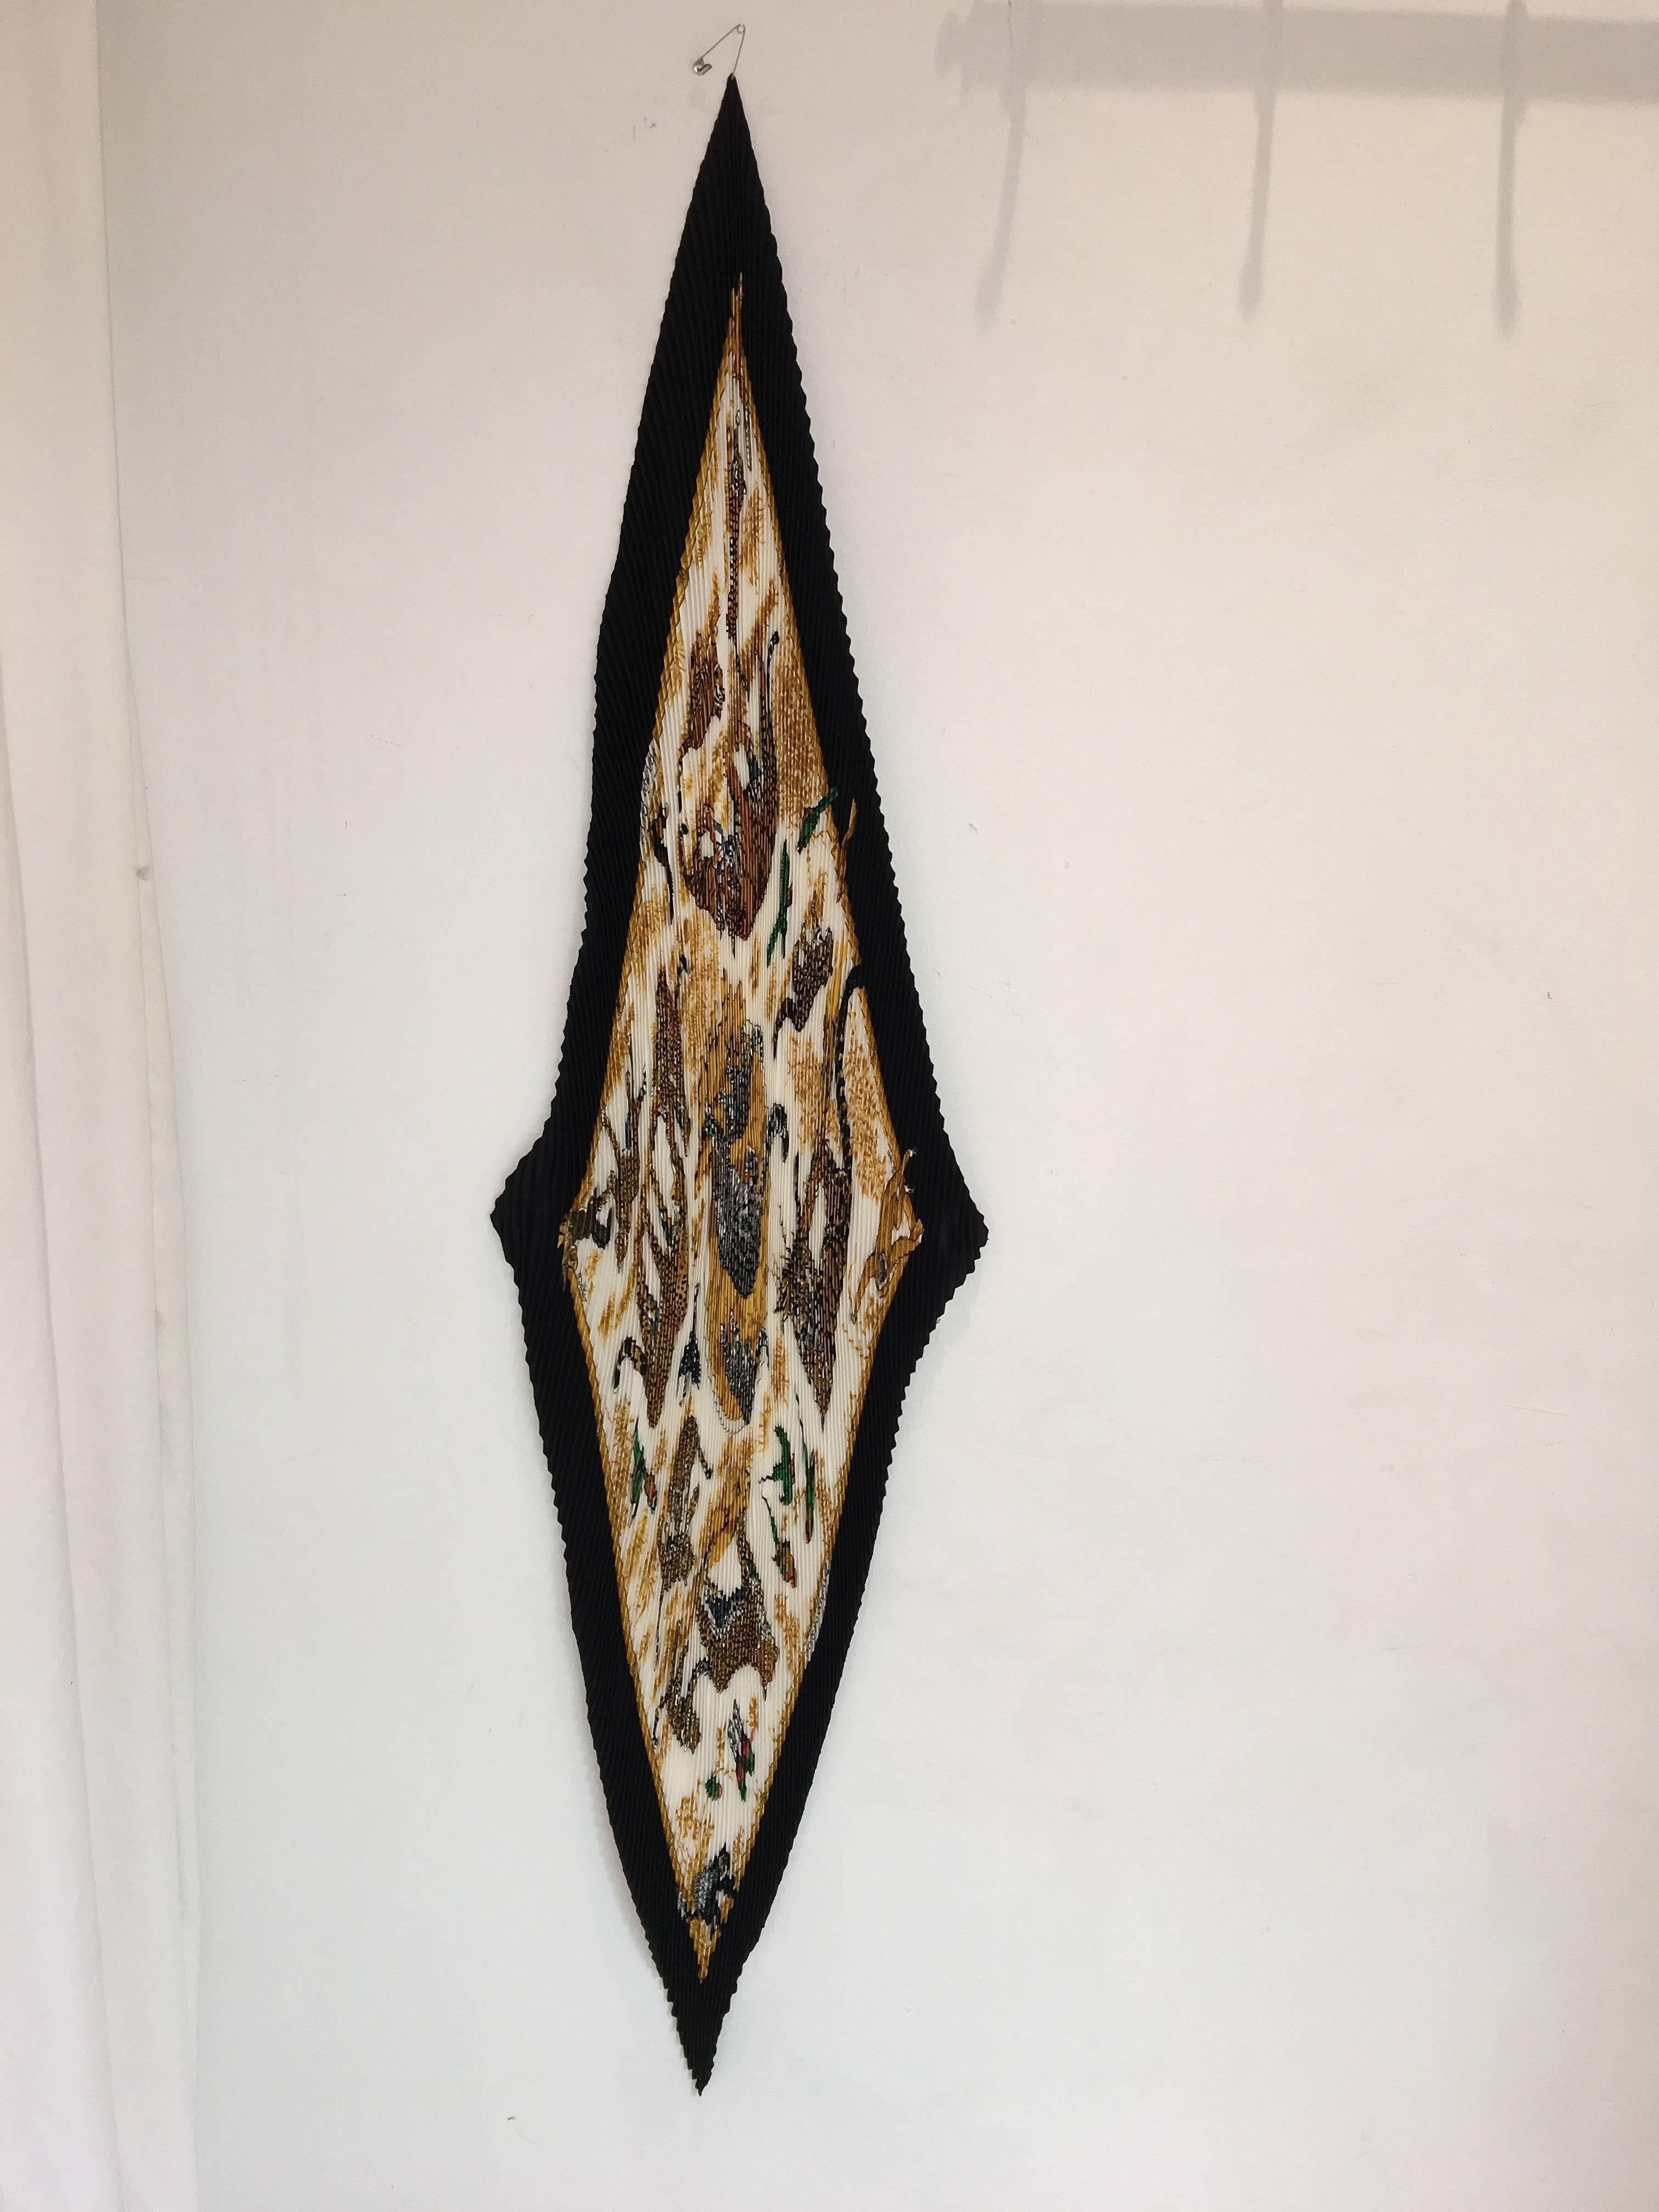 Accordian Tiger Print Hermes Scarf. Black, Yellow, and Cream coloring scrunched silk scarf with Tiger details. 